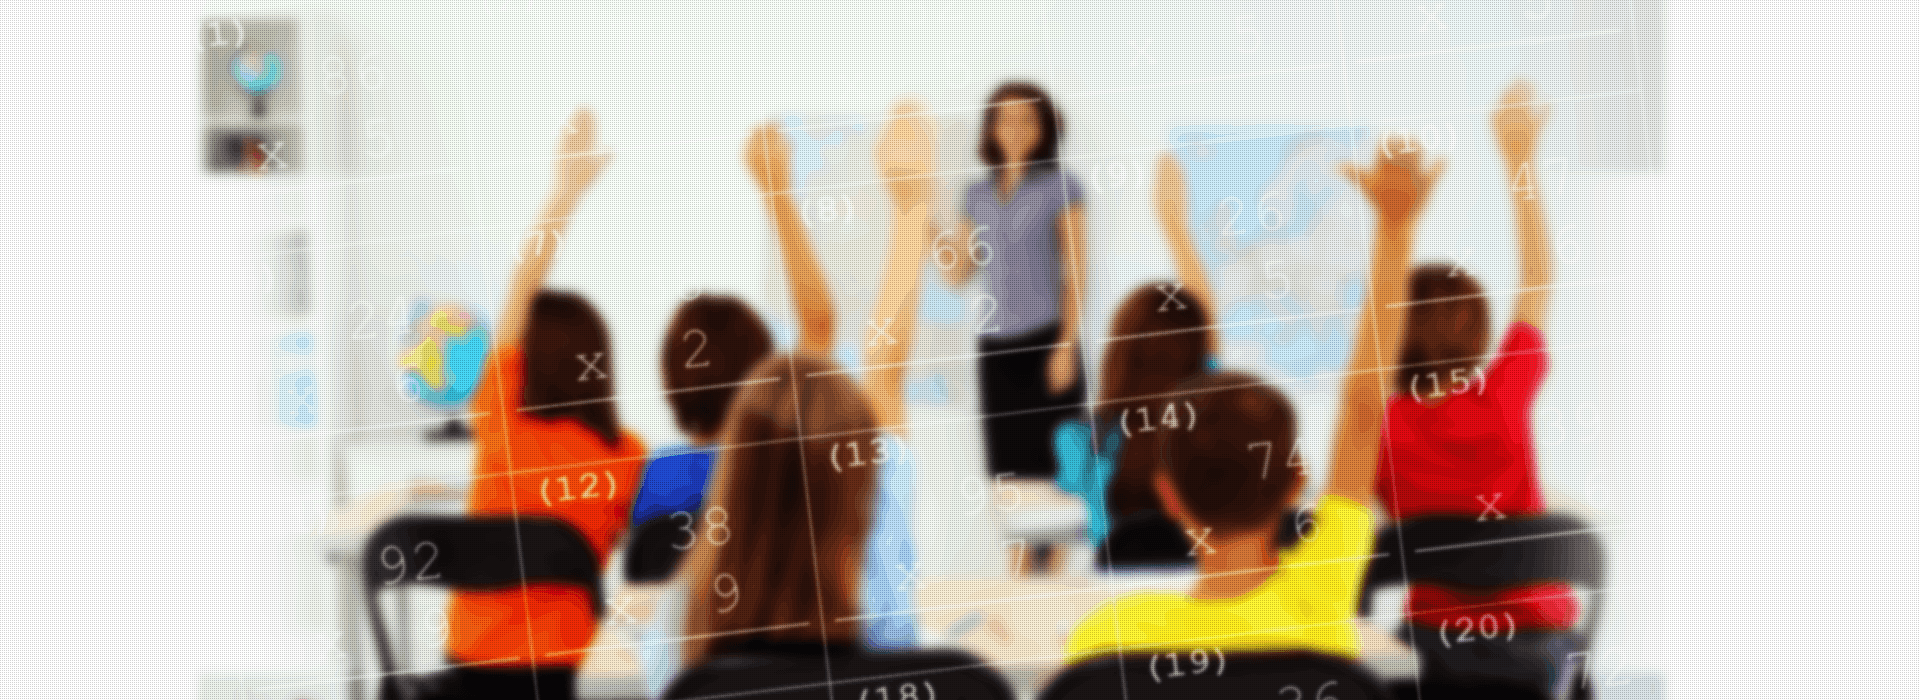 Image showing a classroom of students with their hand raised and a female teacher in front of a whiteboard. 